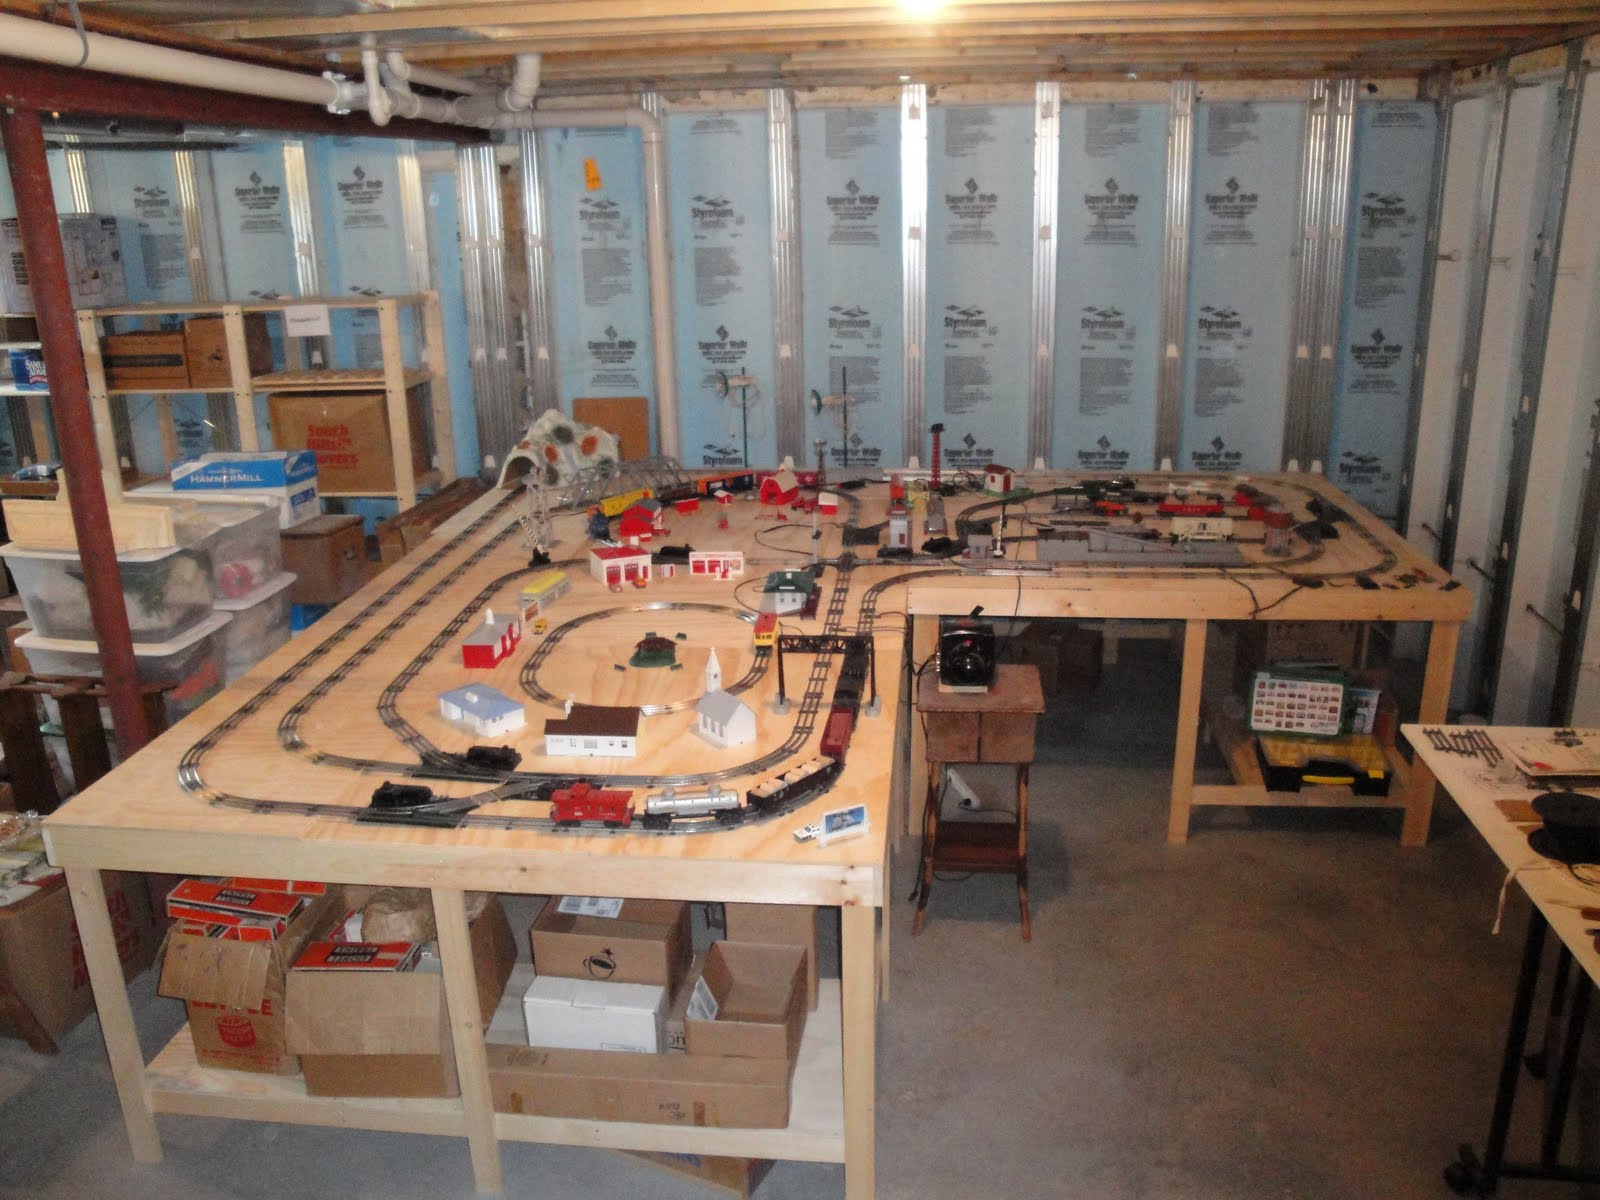  building a new house!: Lunger Valley Model RailRoad - the beginning